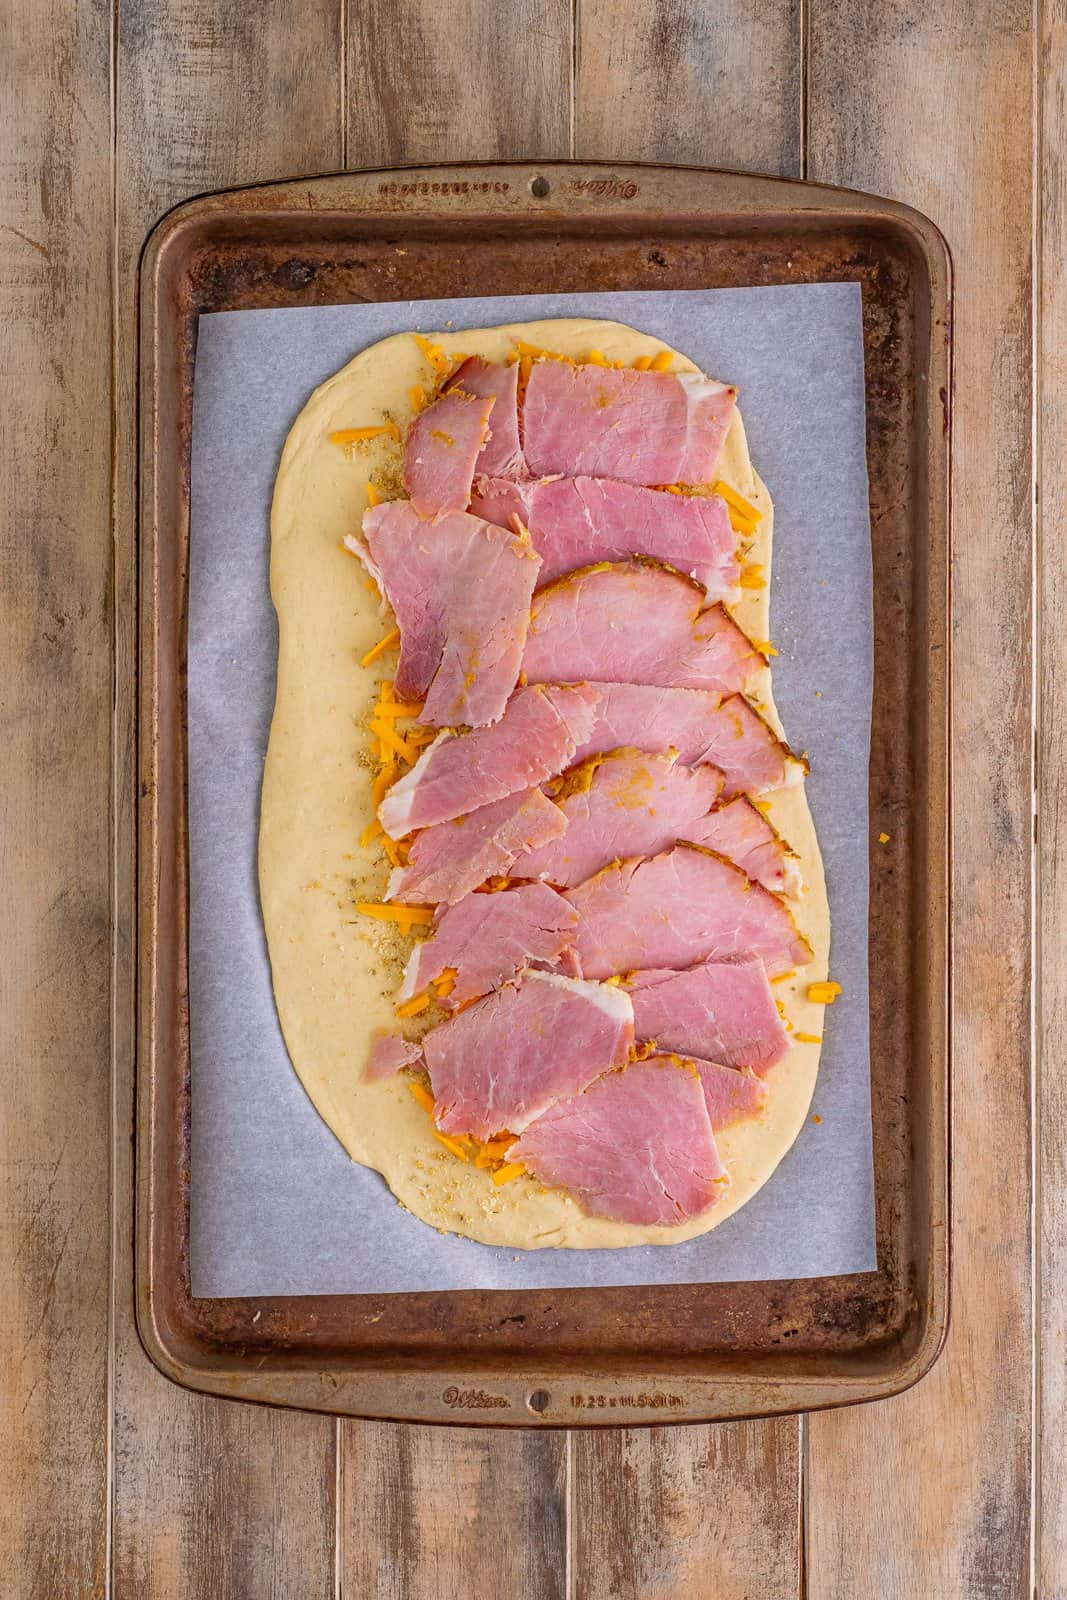 sliced ham layered evenly over cheddar cheese on pizza dough.